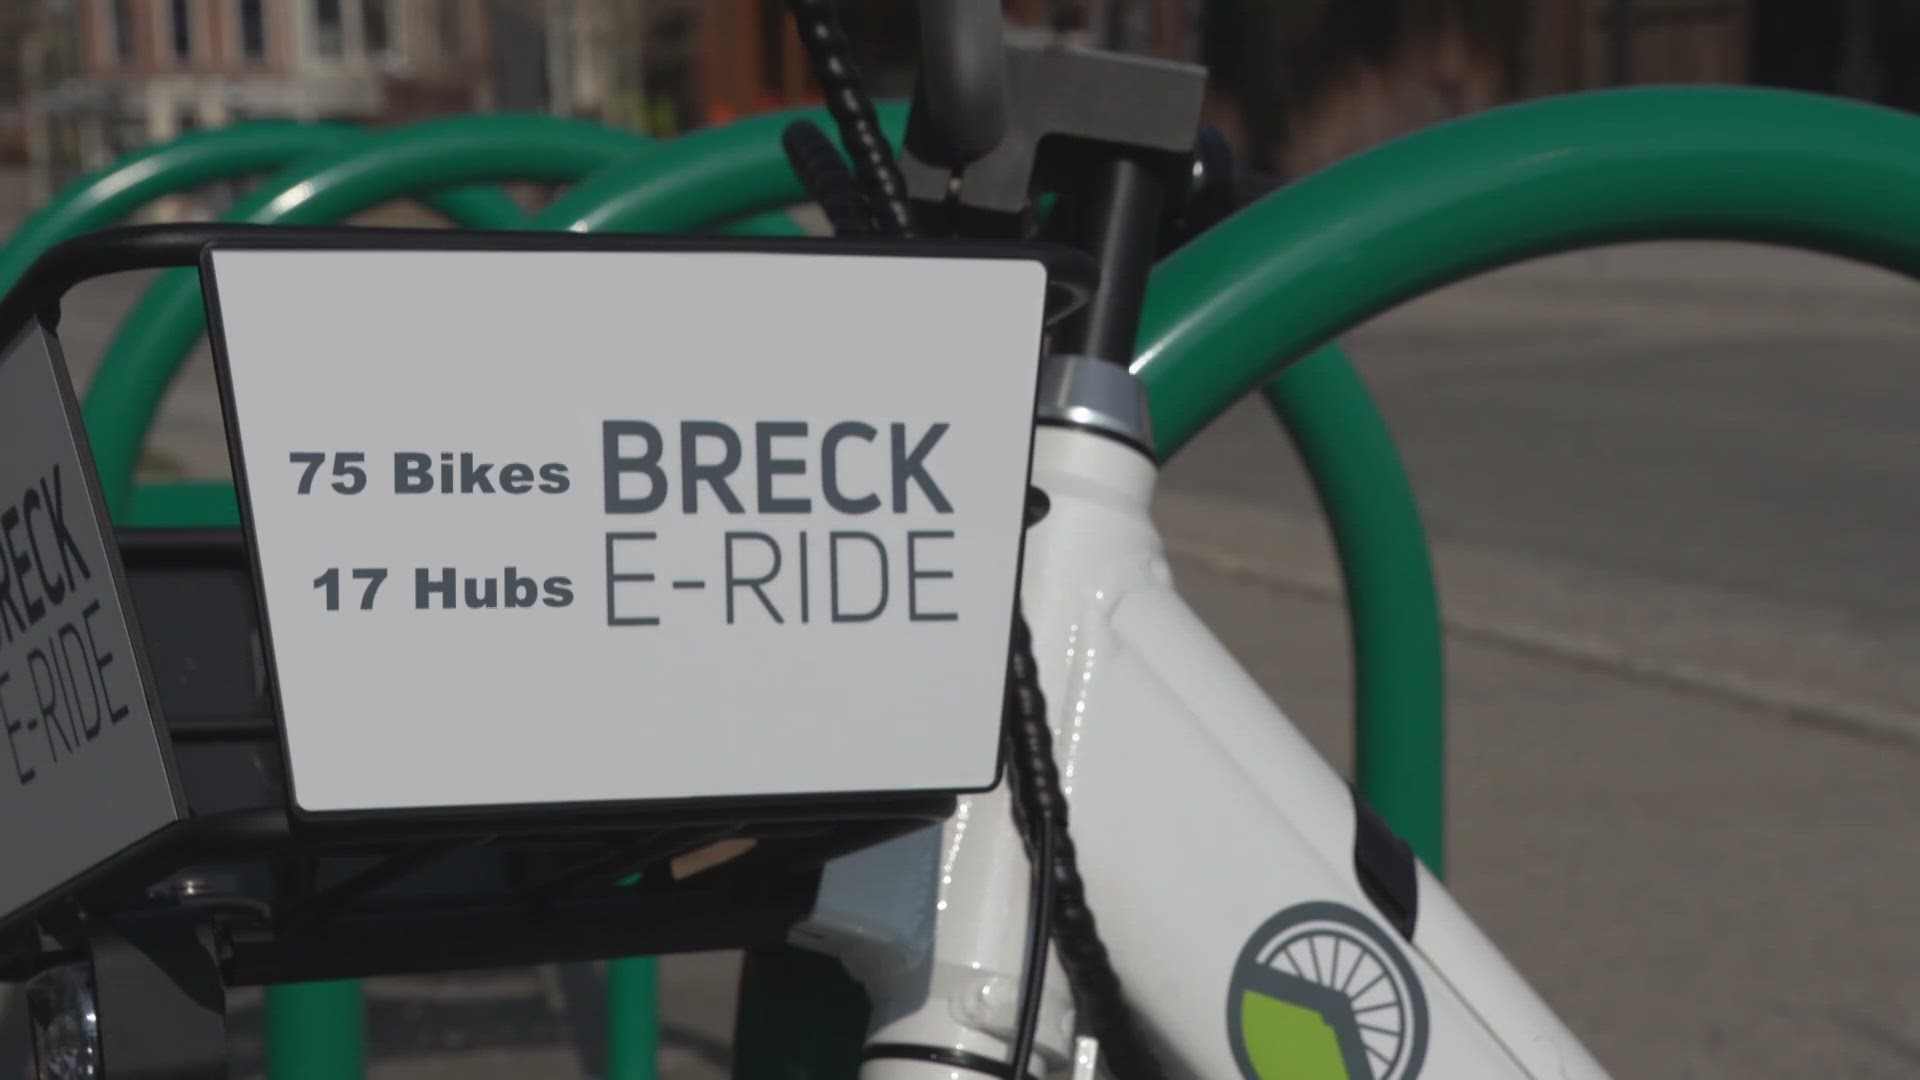 An e-bike ride share program just launched in Breckenridge with 75 bikes at 17 hubs around town aimed at reducing the number of cars and carbon emissions in town.